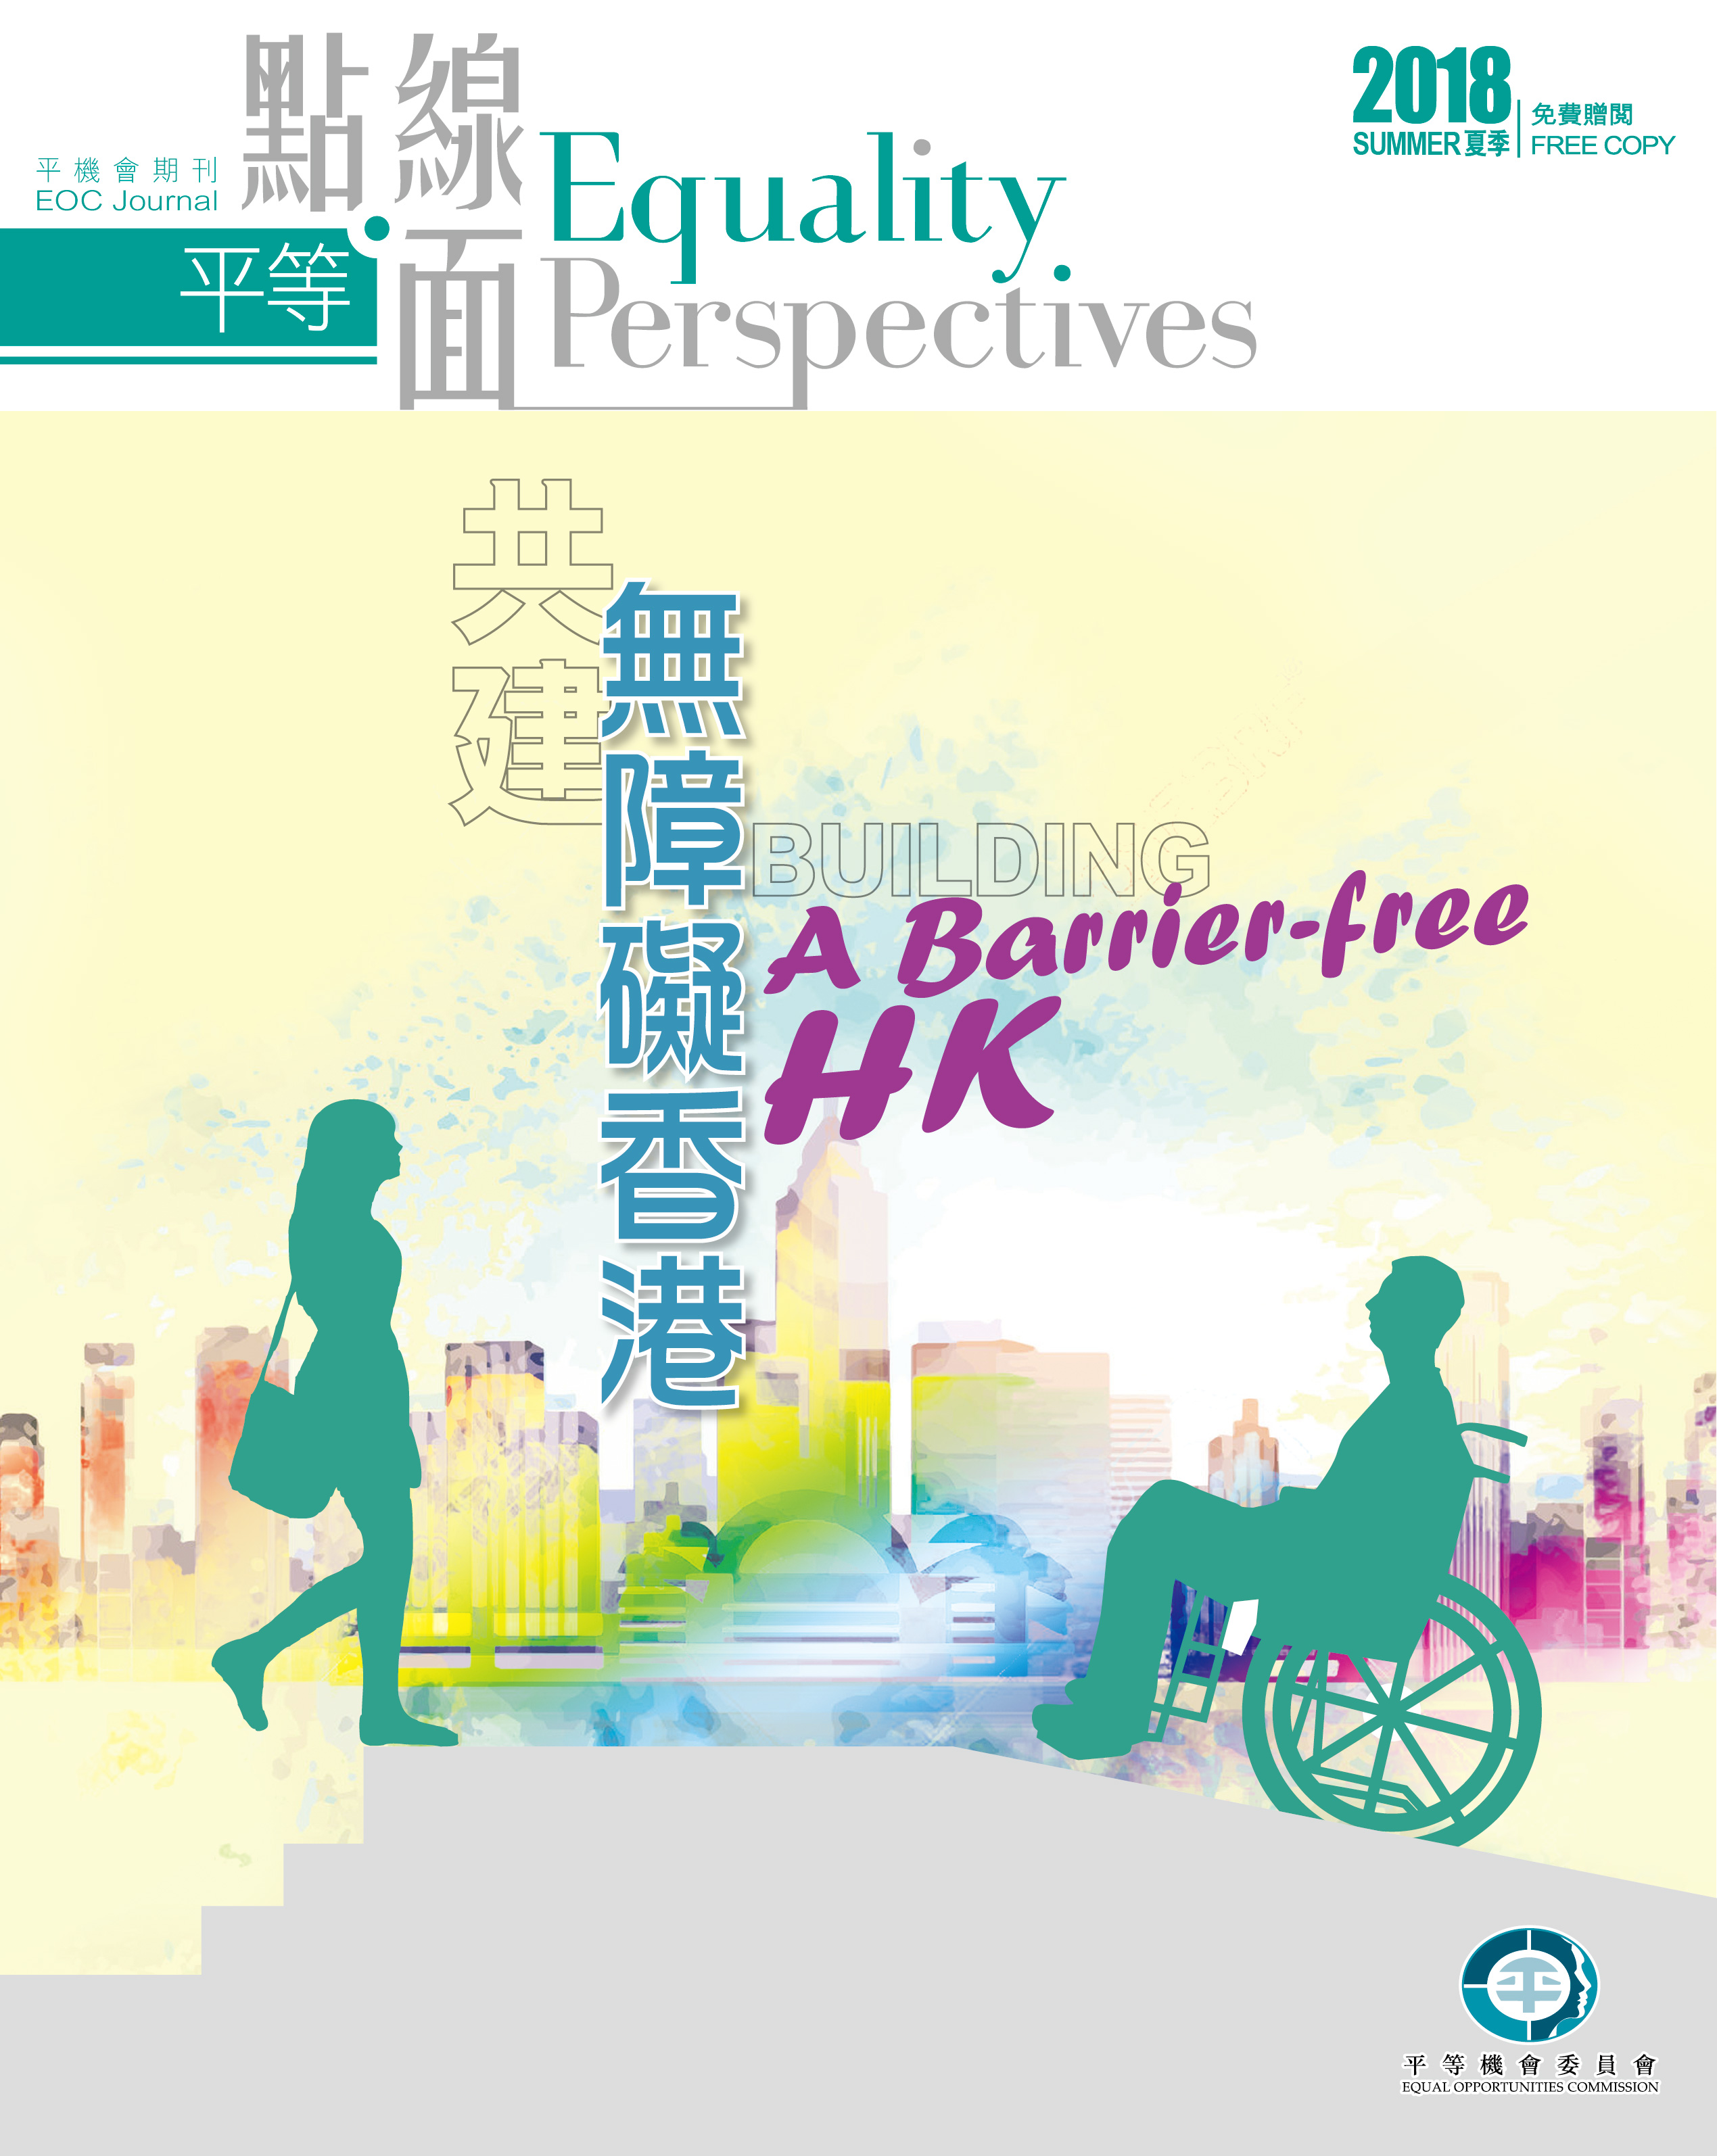 Cover of 2018 Summer issue of Equality Perspectives, showing a woman going up the stairs, about to meet a man going up a ramp in a wheelchair